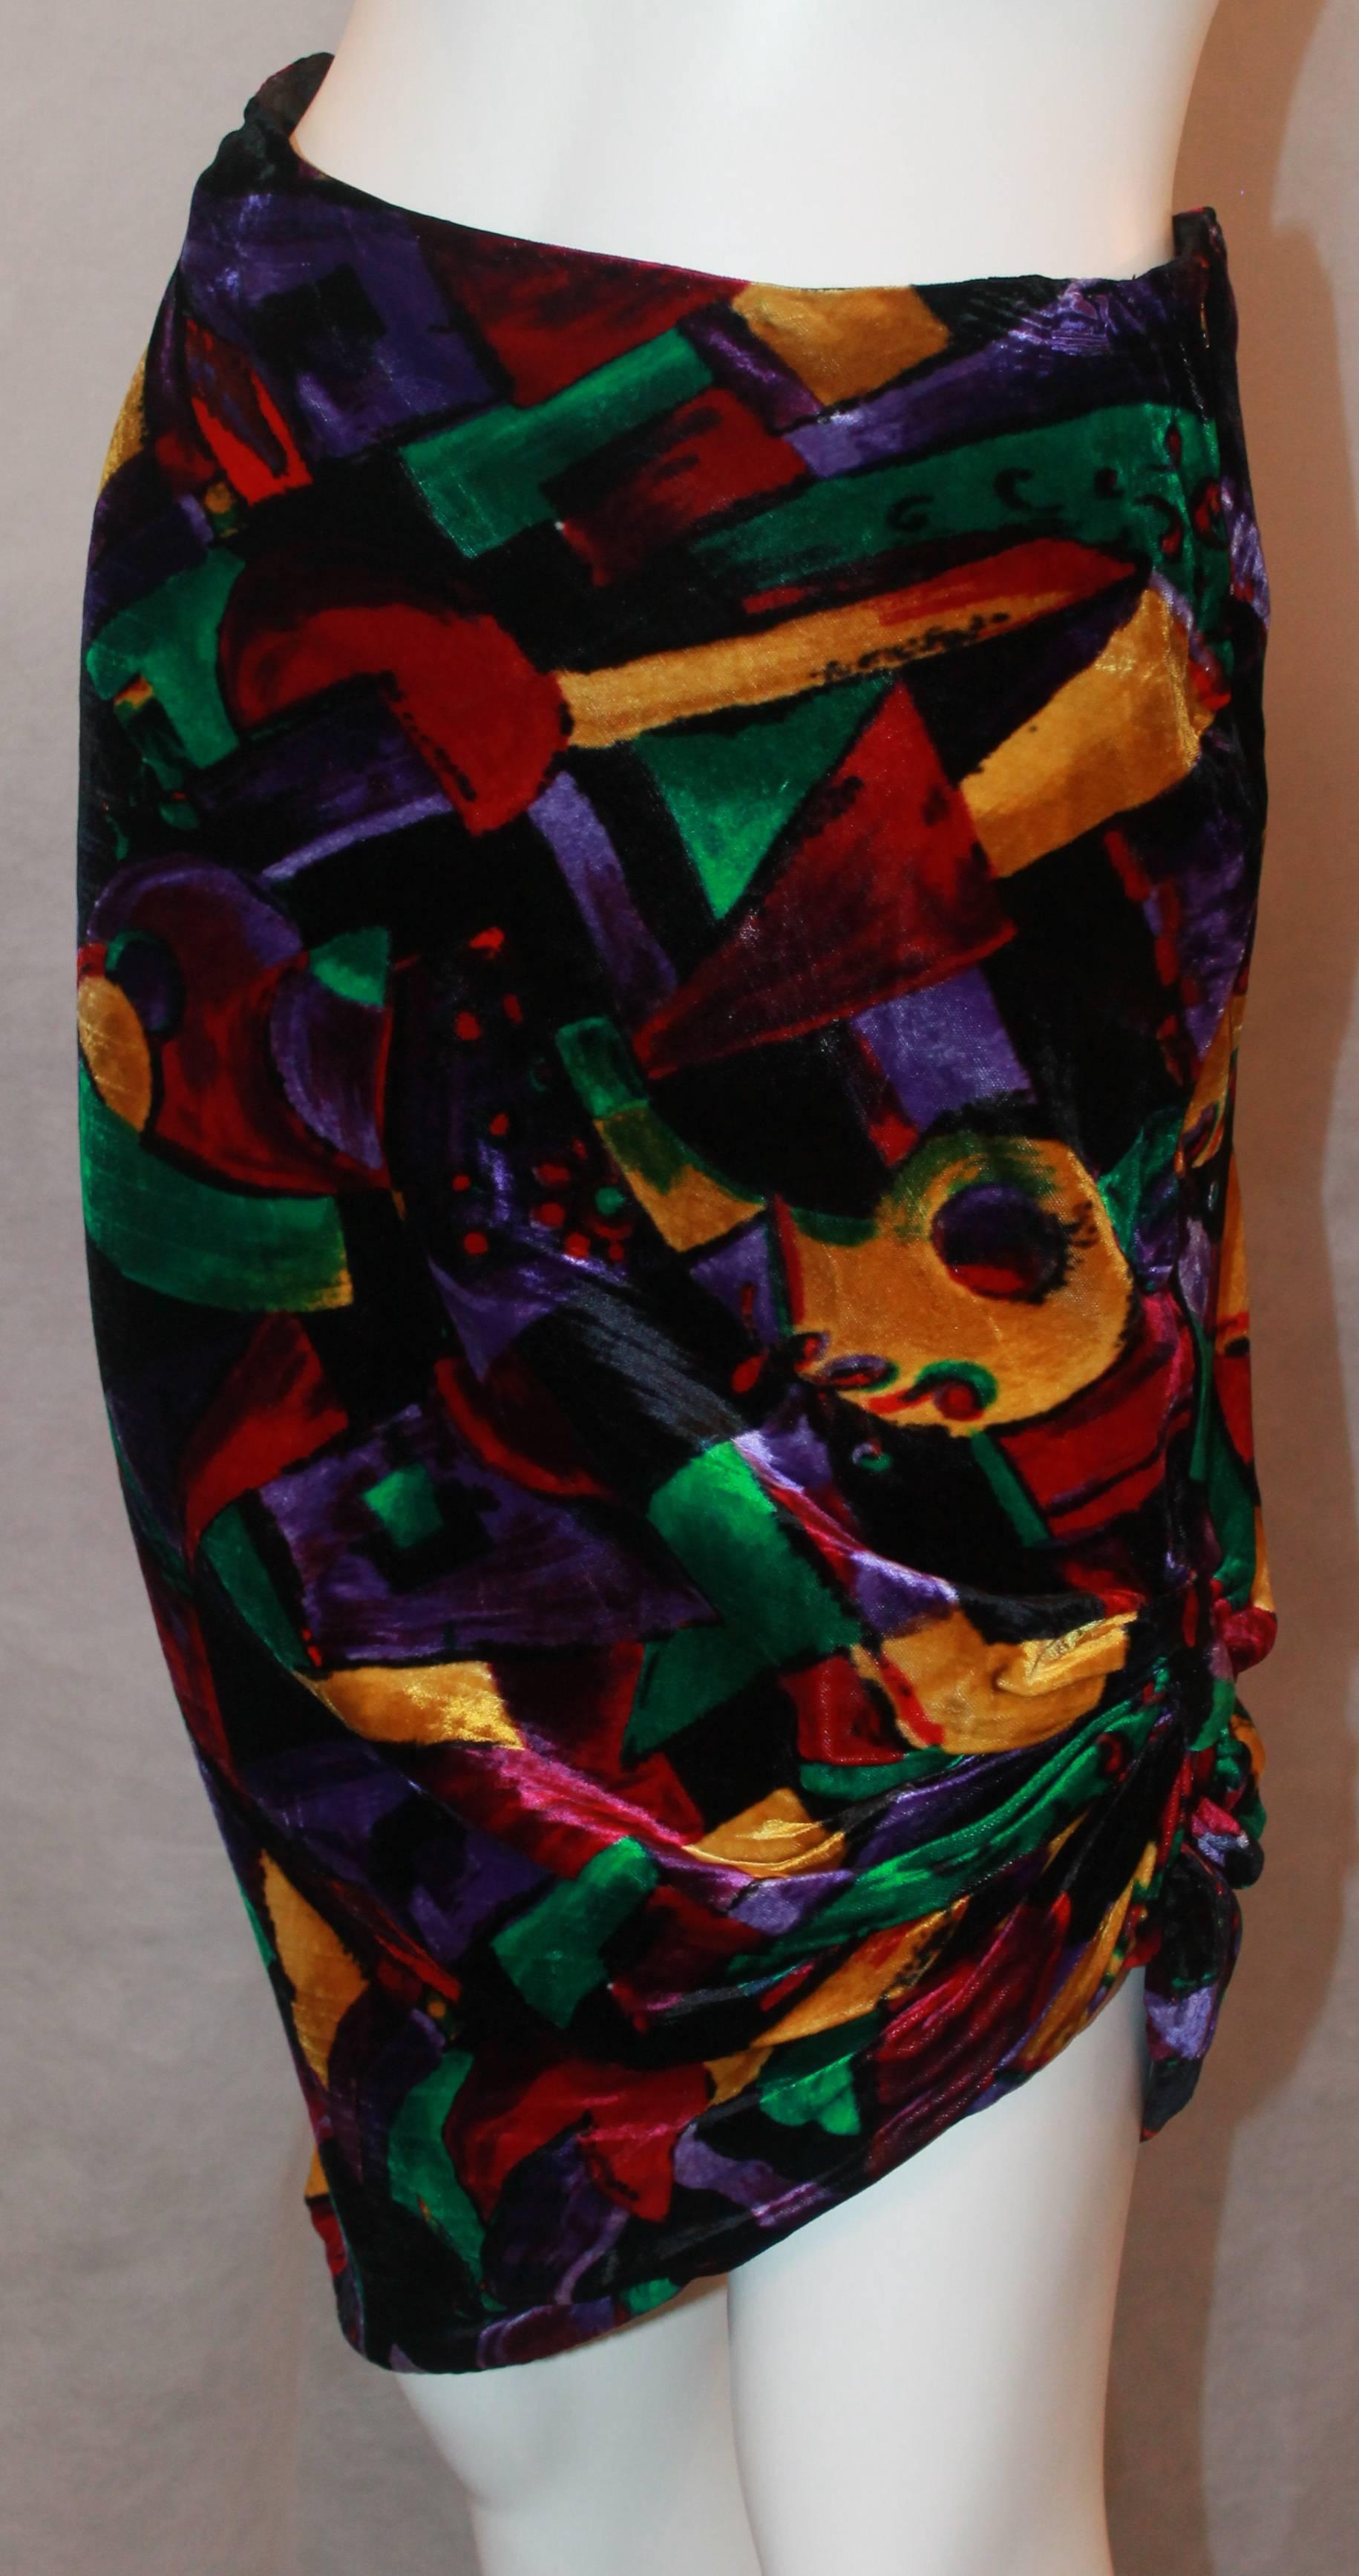 Gianni Versace Couture Vintage Abstract Velvet Skirt w/ Side Ruching - 4 -1990's.  This skirt is in excellent condition.  It features a unique abstract pattern, side ruching, an asymmetrical hem, and a lovely velvet